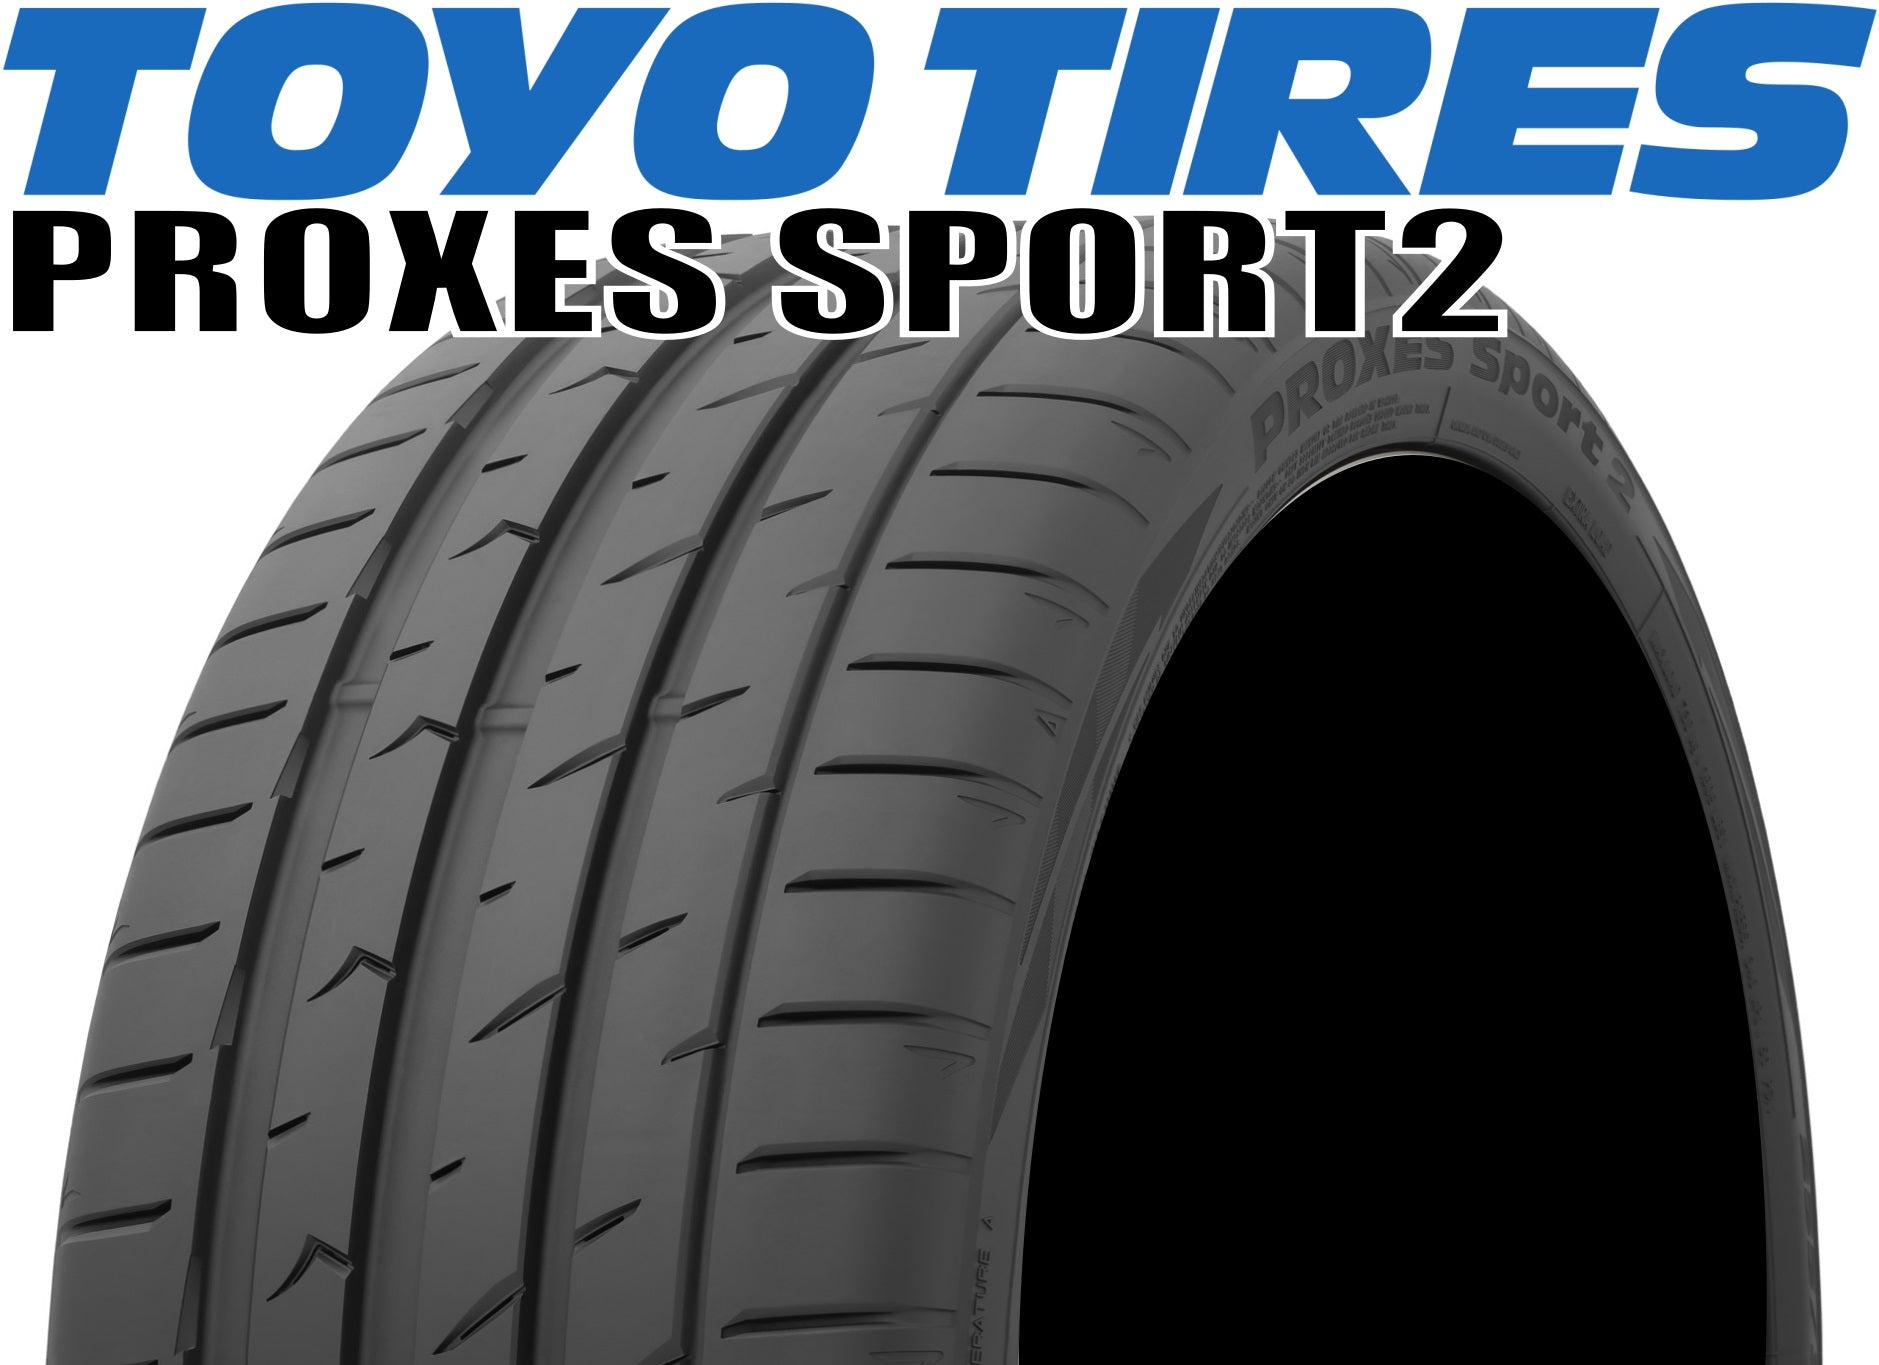 TOYO TIRES PROXES SPORT2(トーヨー プロクセススポーツ) 315/35R20 110Y 315/35-20